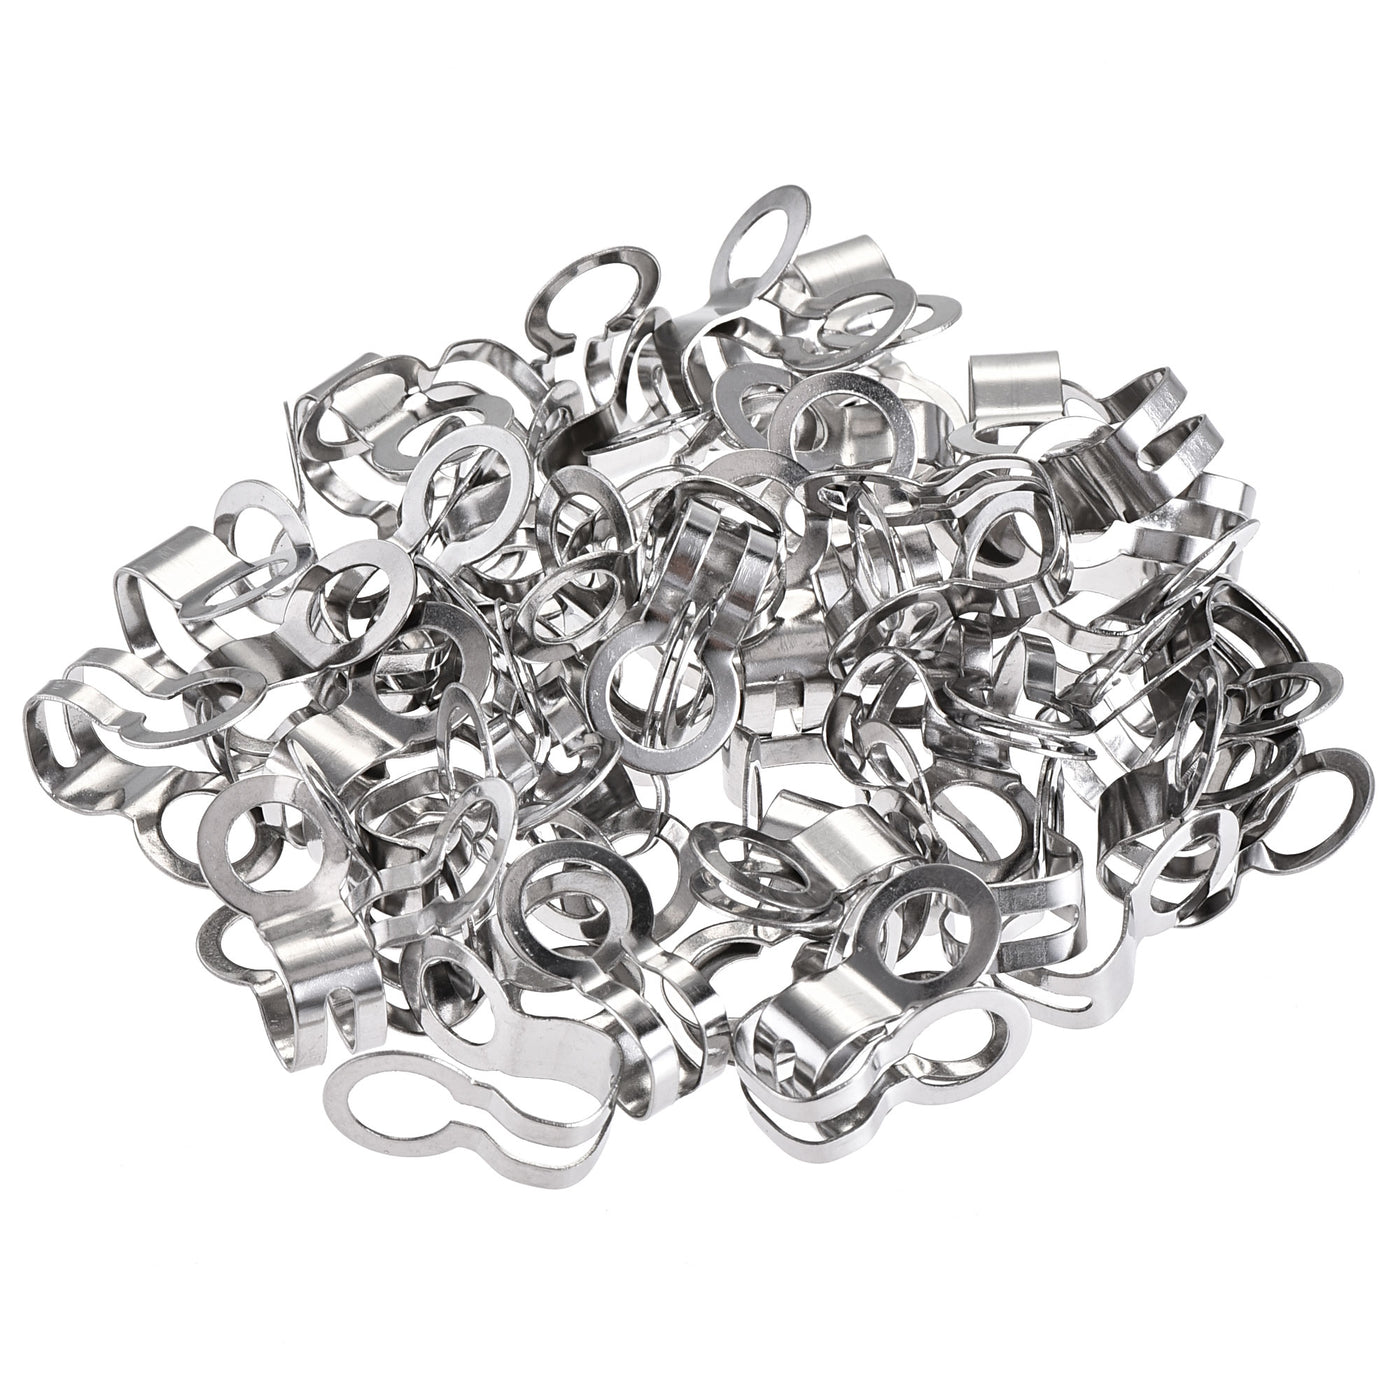 Uxcell Uxcell Ball Chain Connector, 6mm Double Ring Style Link Stainless Steel Loop Connection, Pack of 50